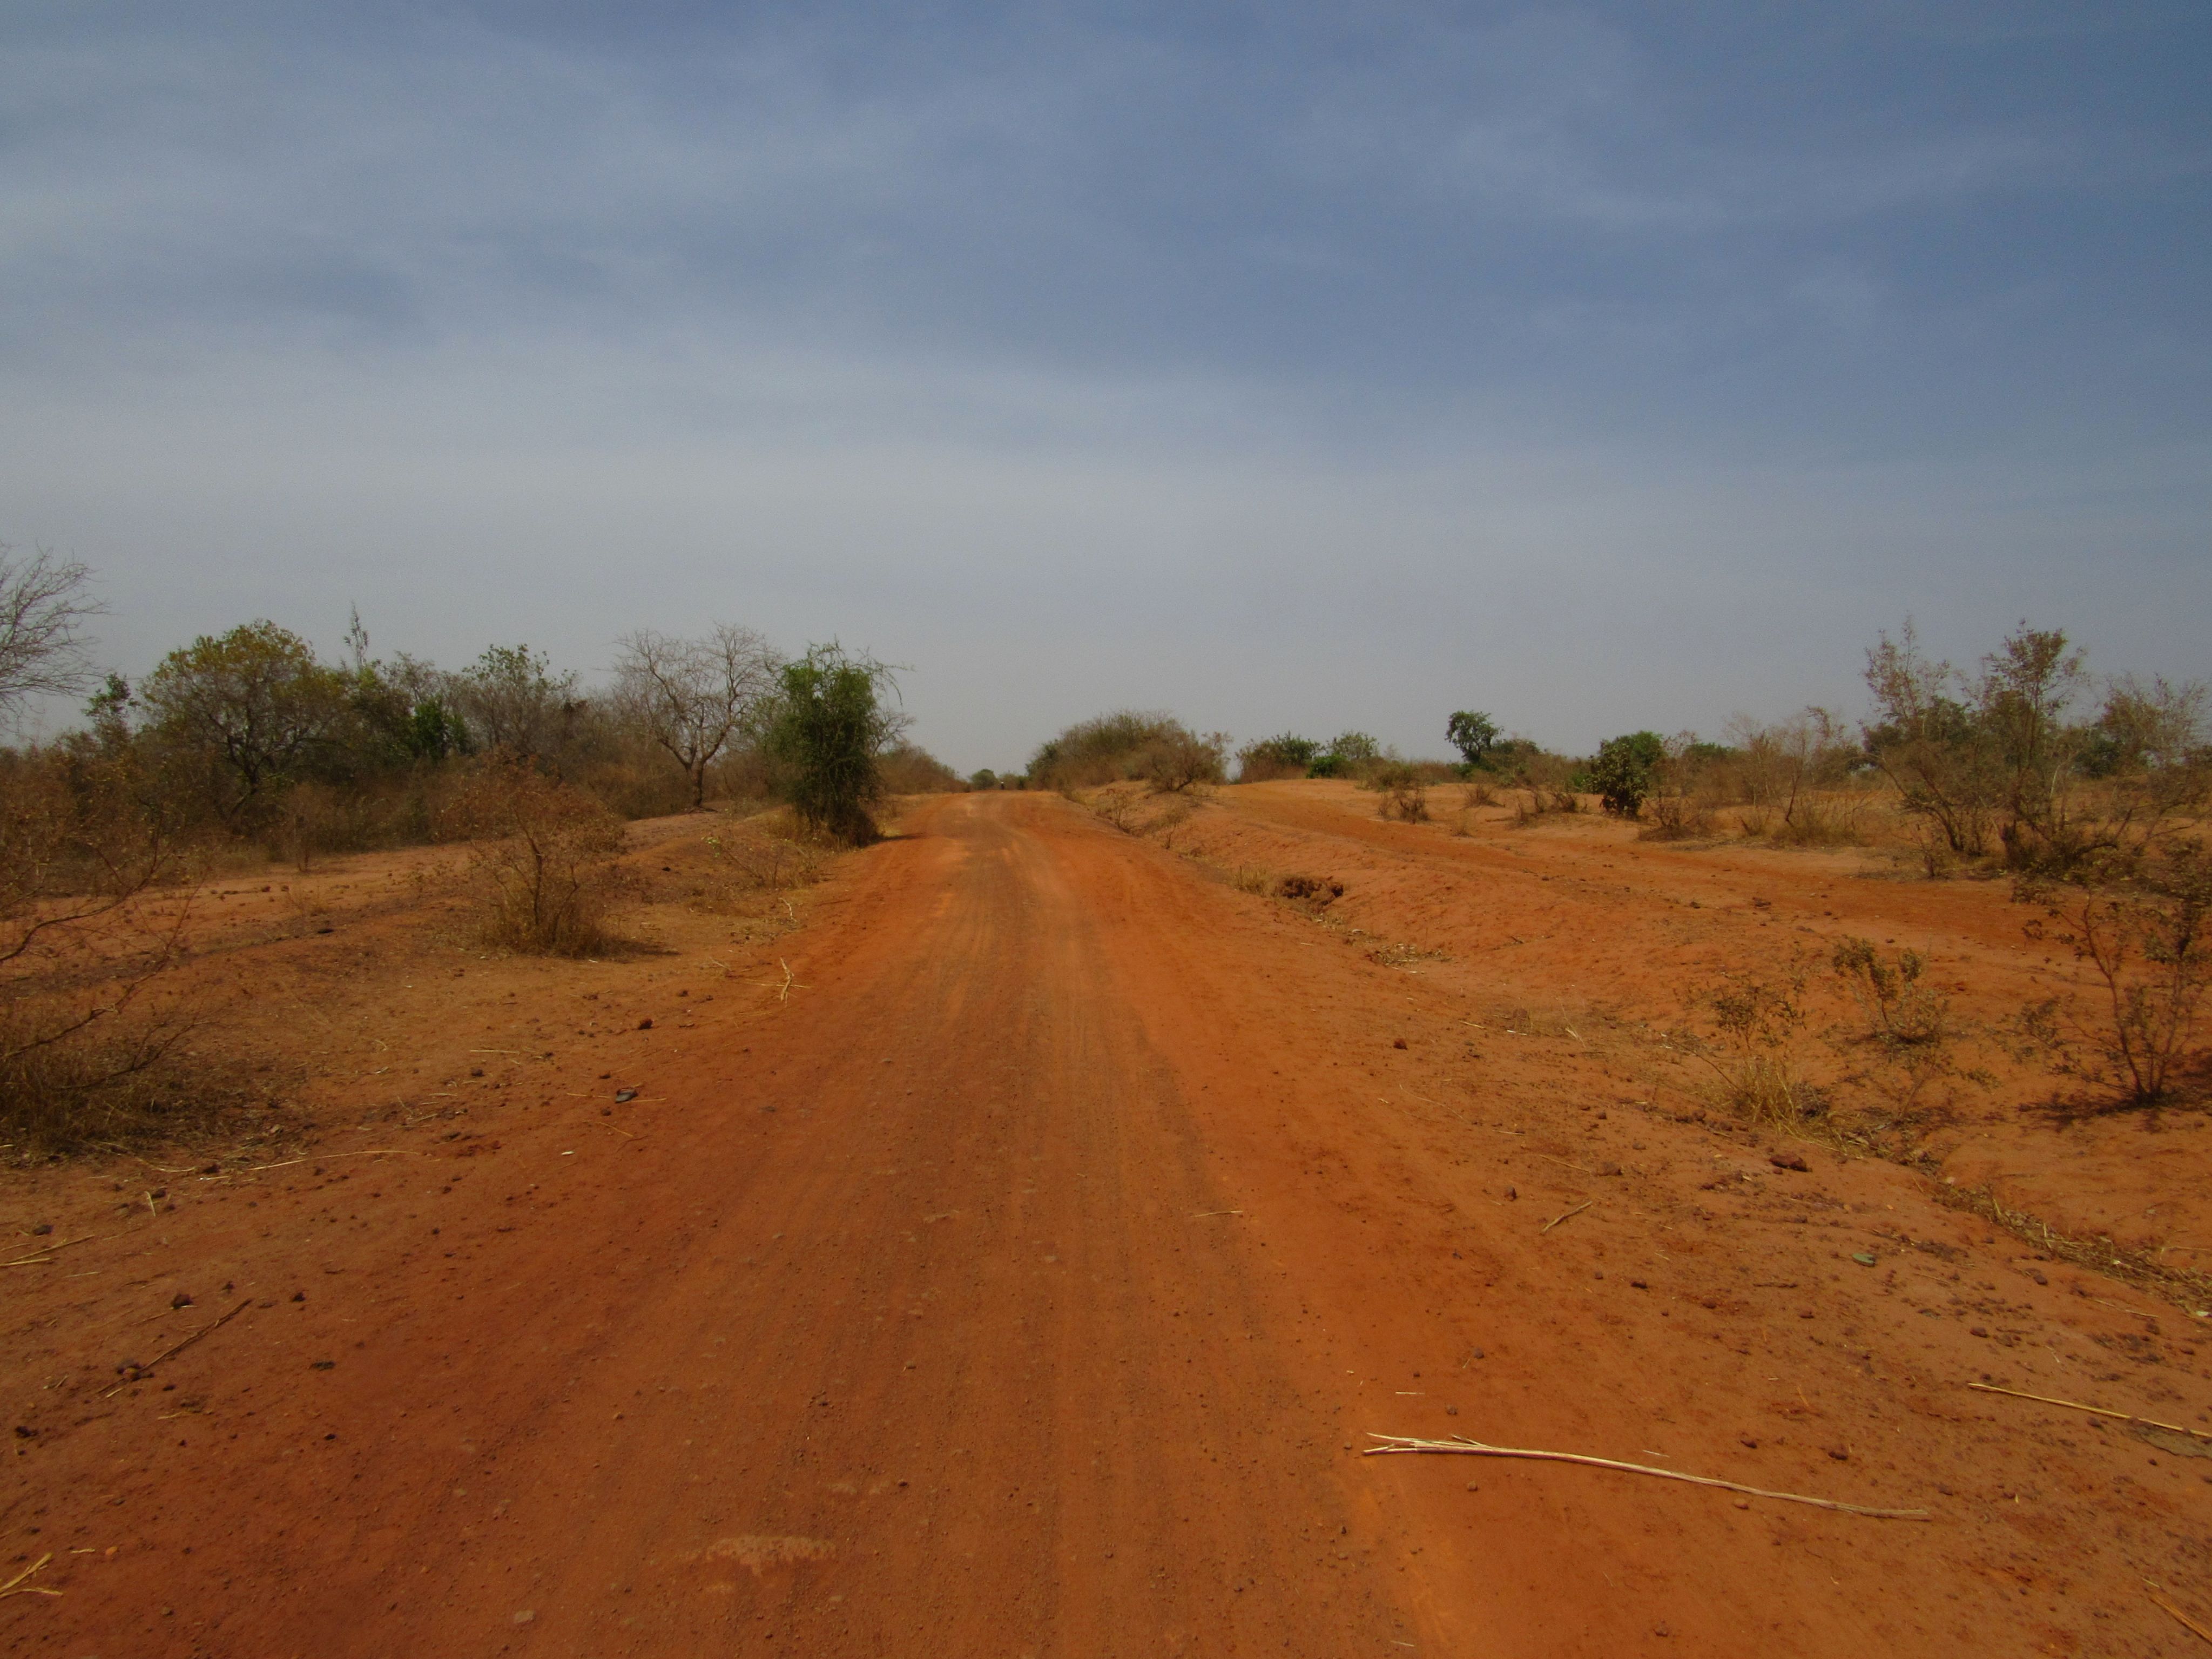 Landscape with trees and red dirt road